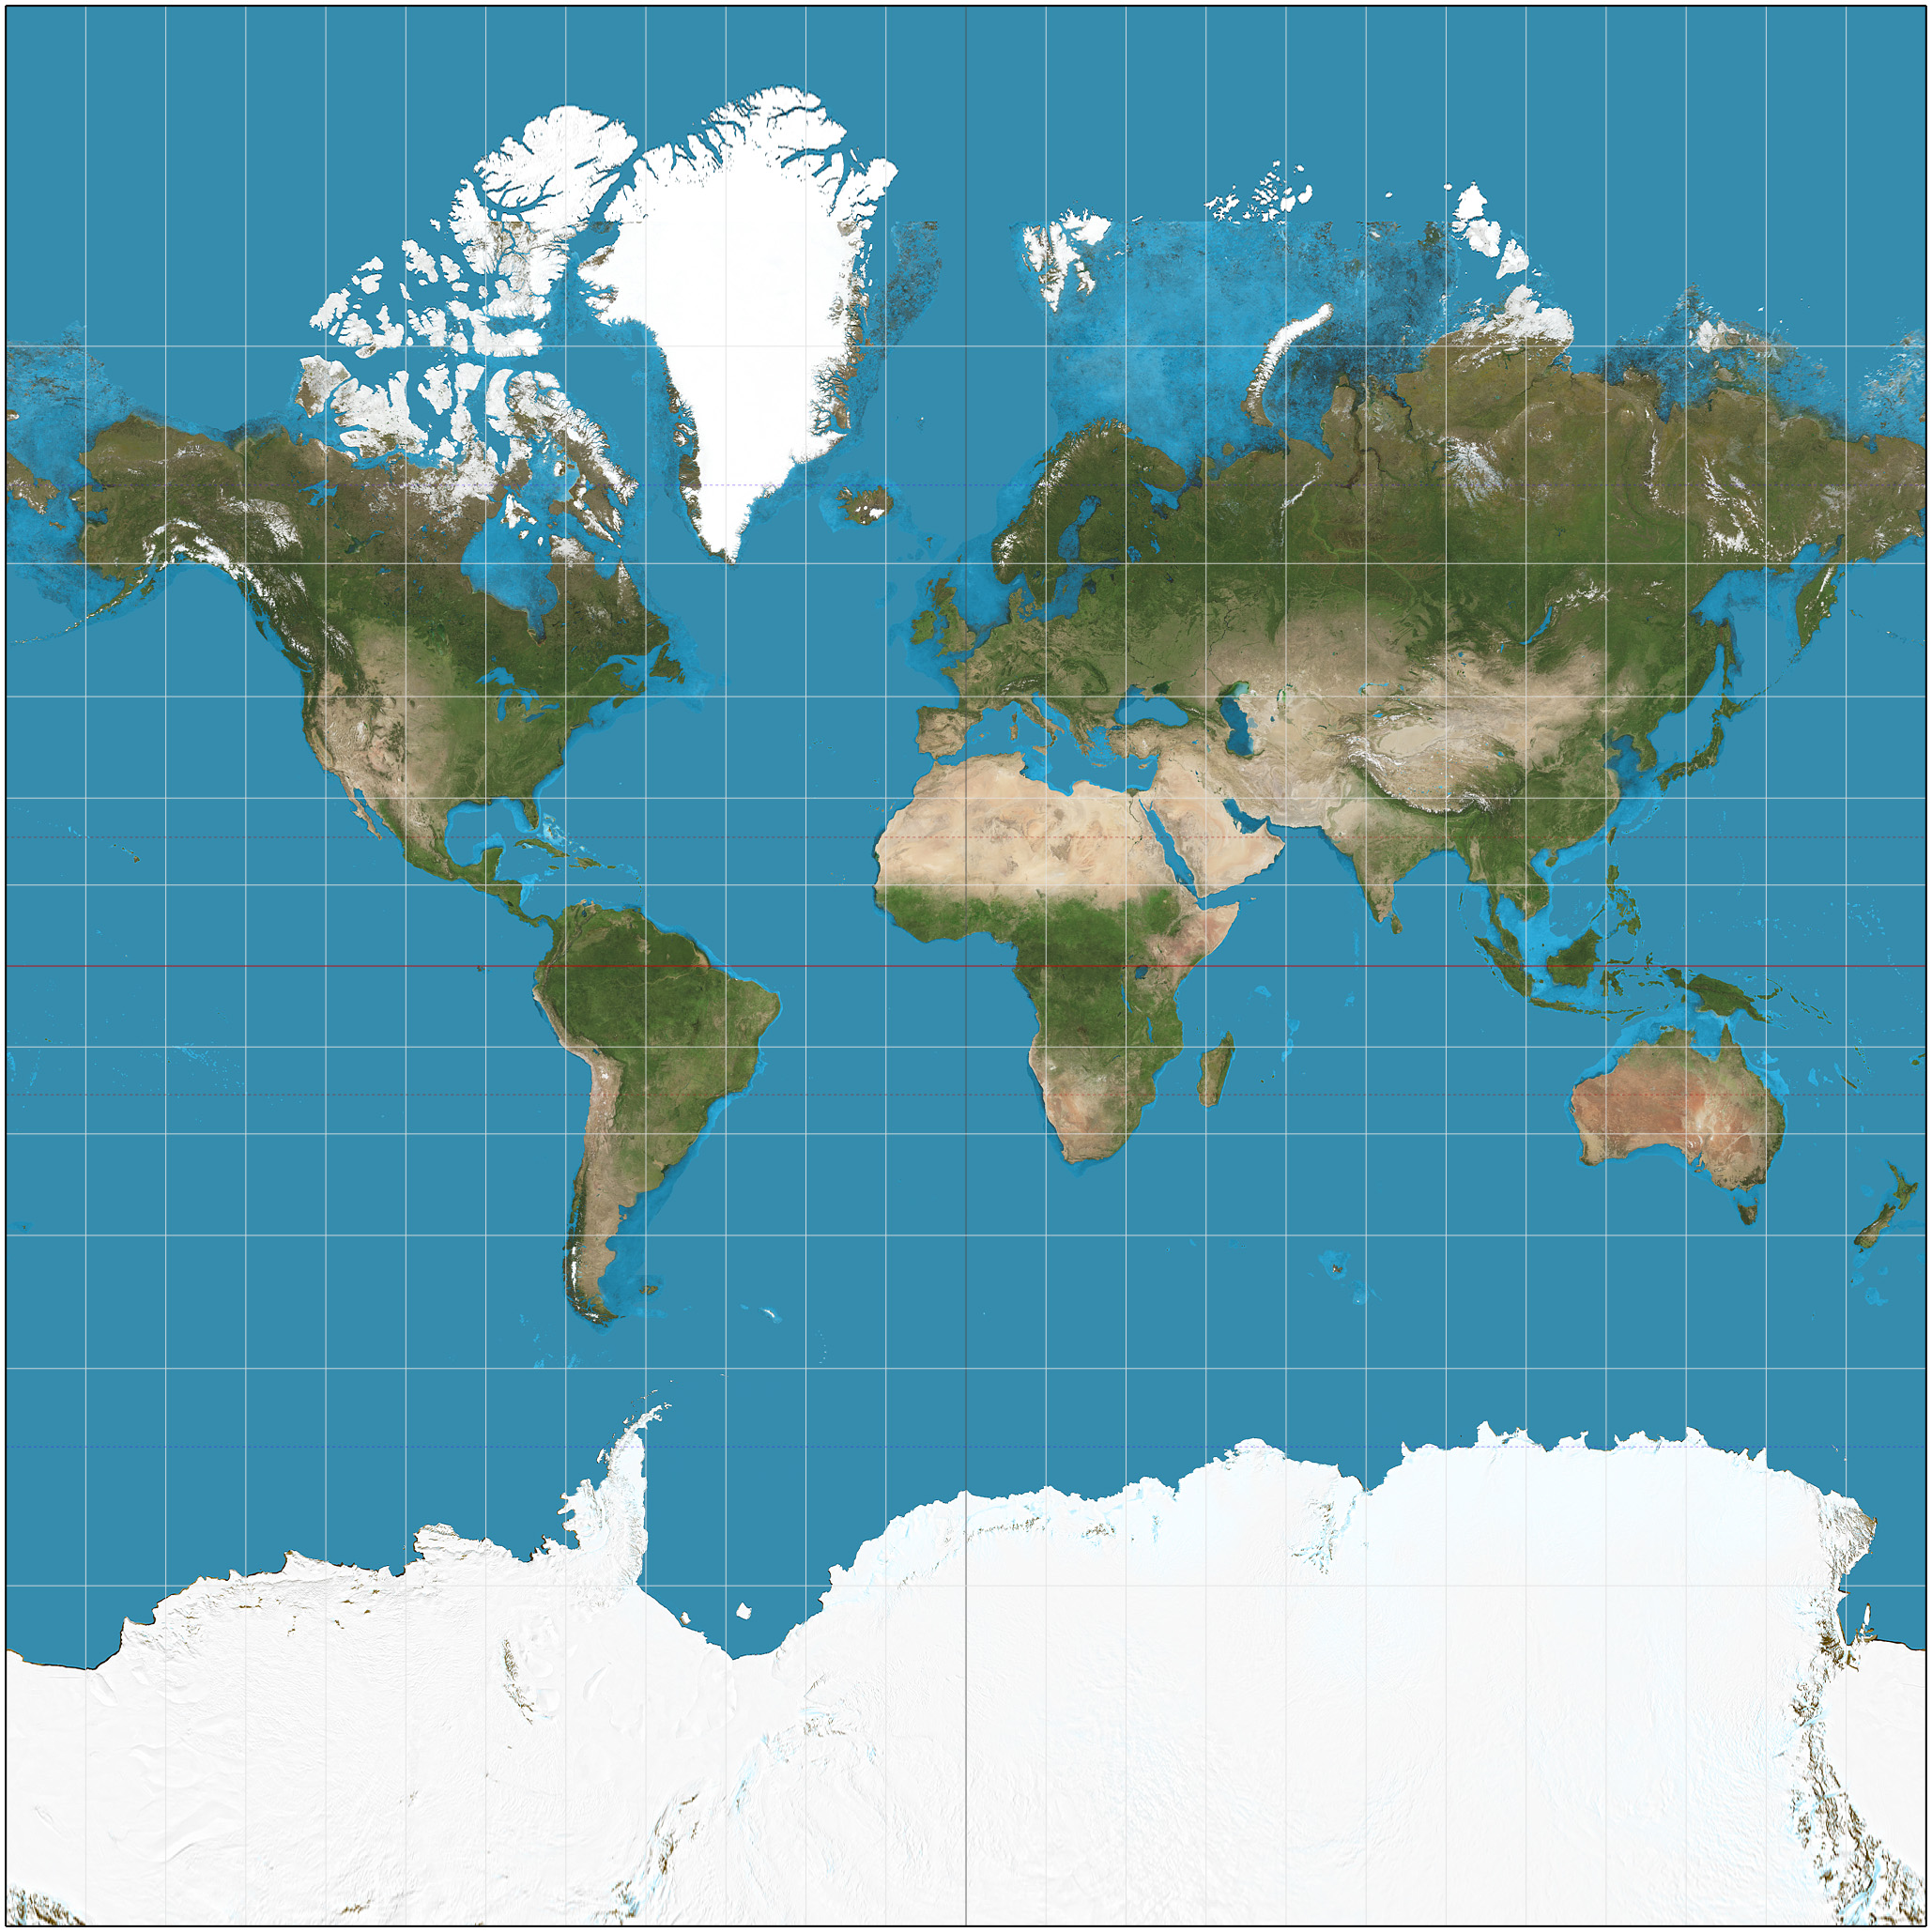 <ul><li><p>Used for navigation because distance accurate</p></li><li><p>Increased size distortion the further away from the equator (ex. North looks a lot bigger than it is)</p></li></ul>